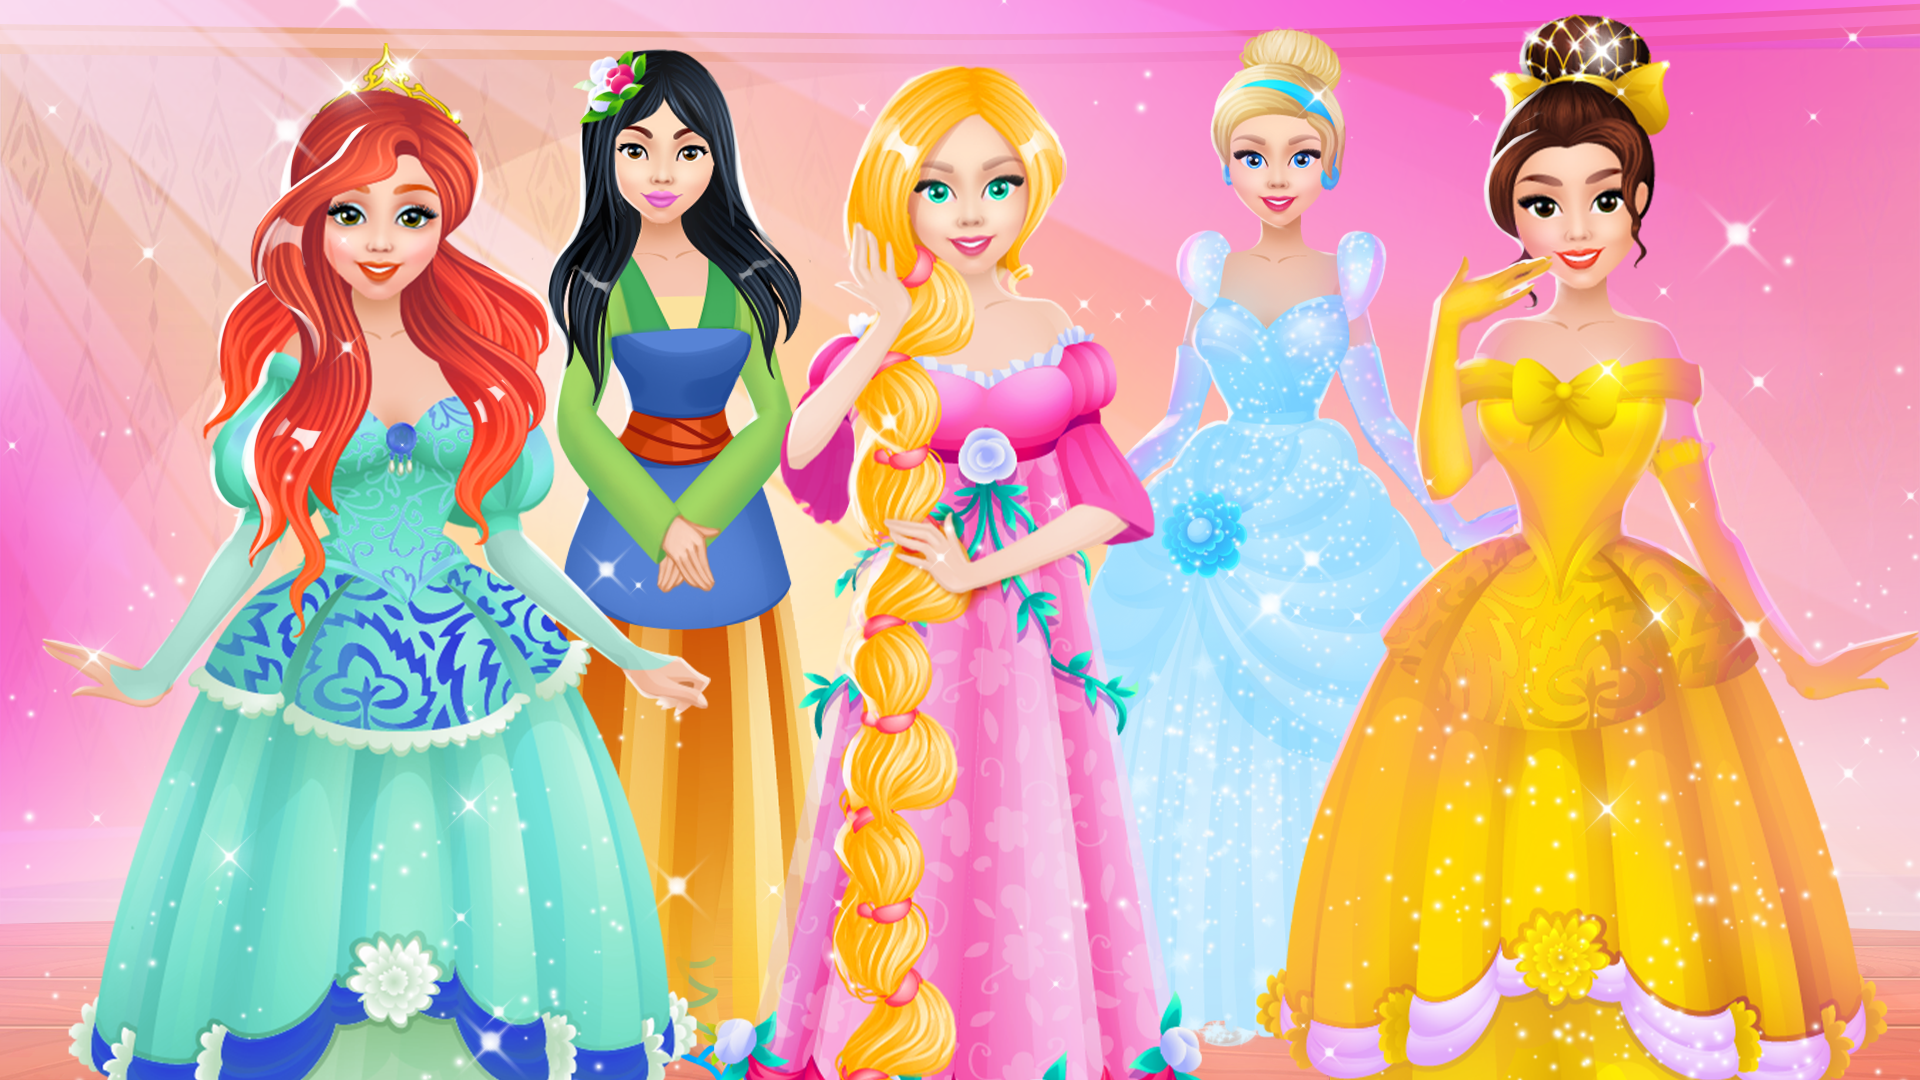 Top 10 Dress Up Games for Girls | Star fashion, Best dress up games, Games  for girls